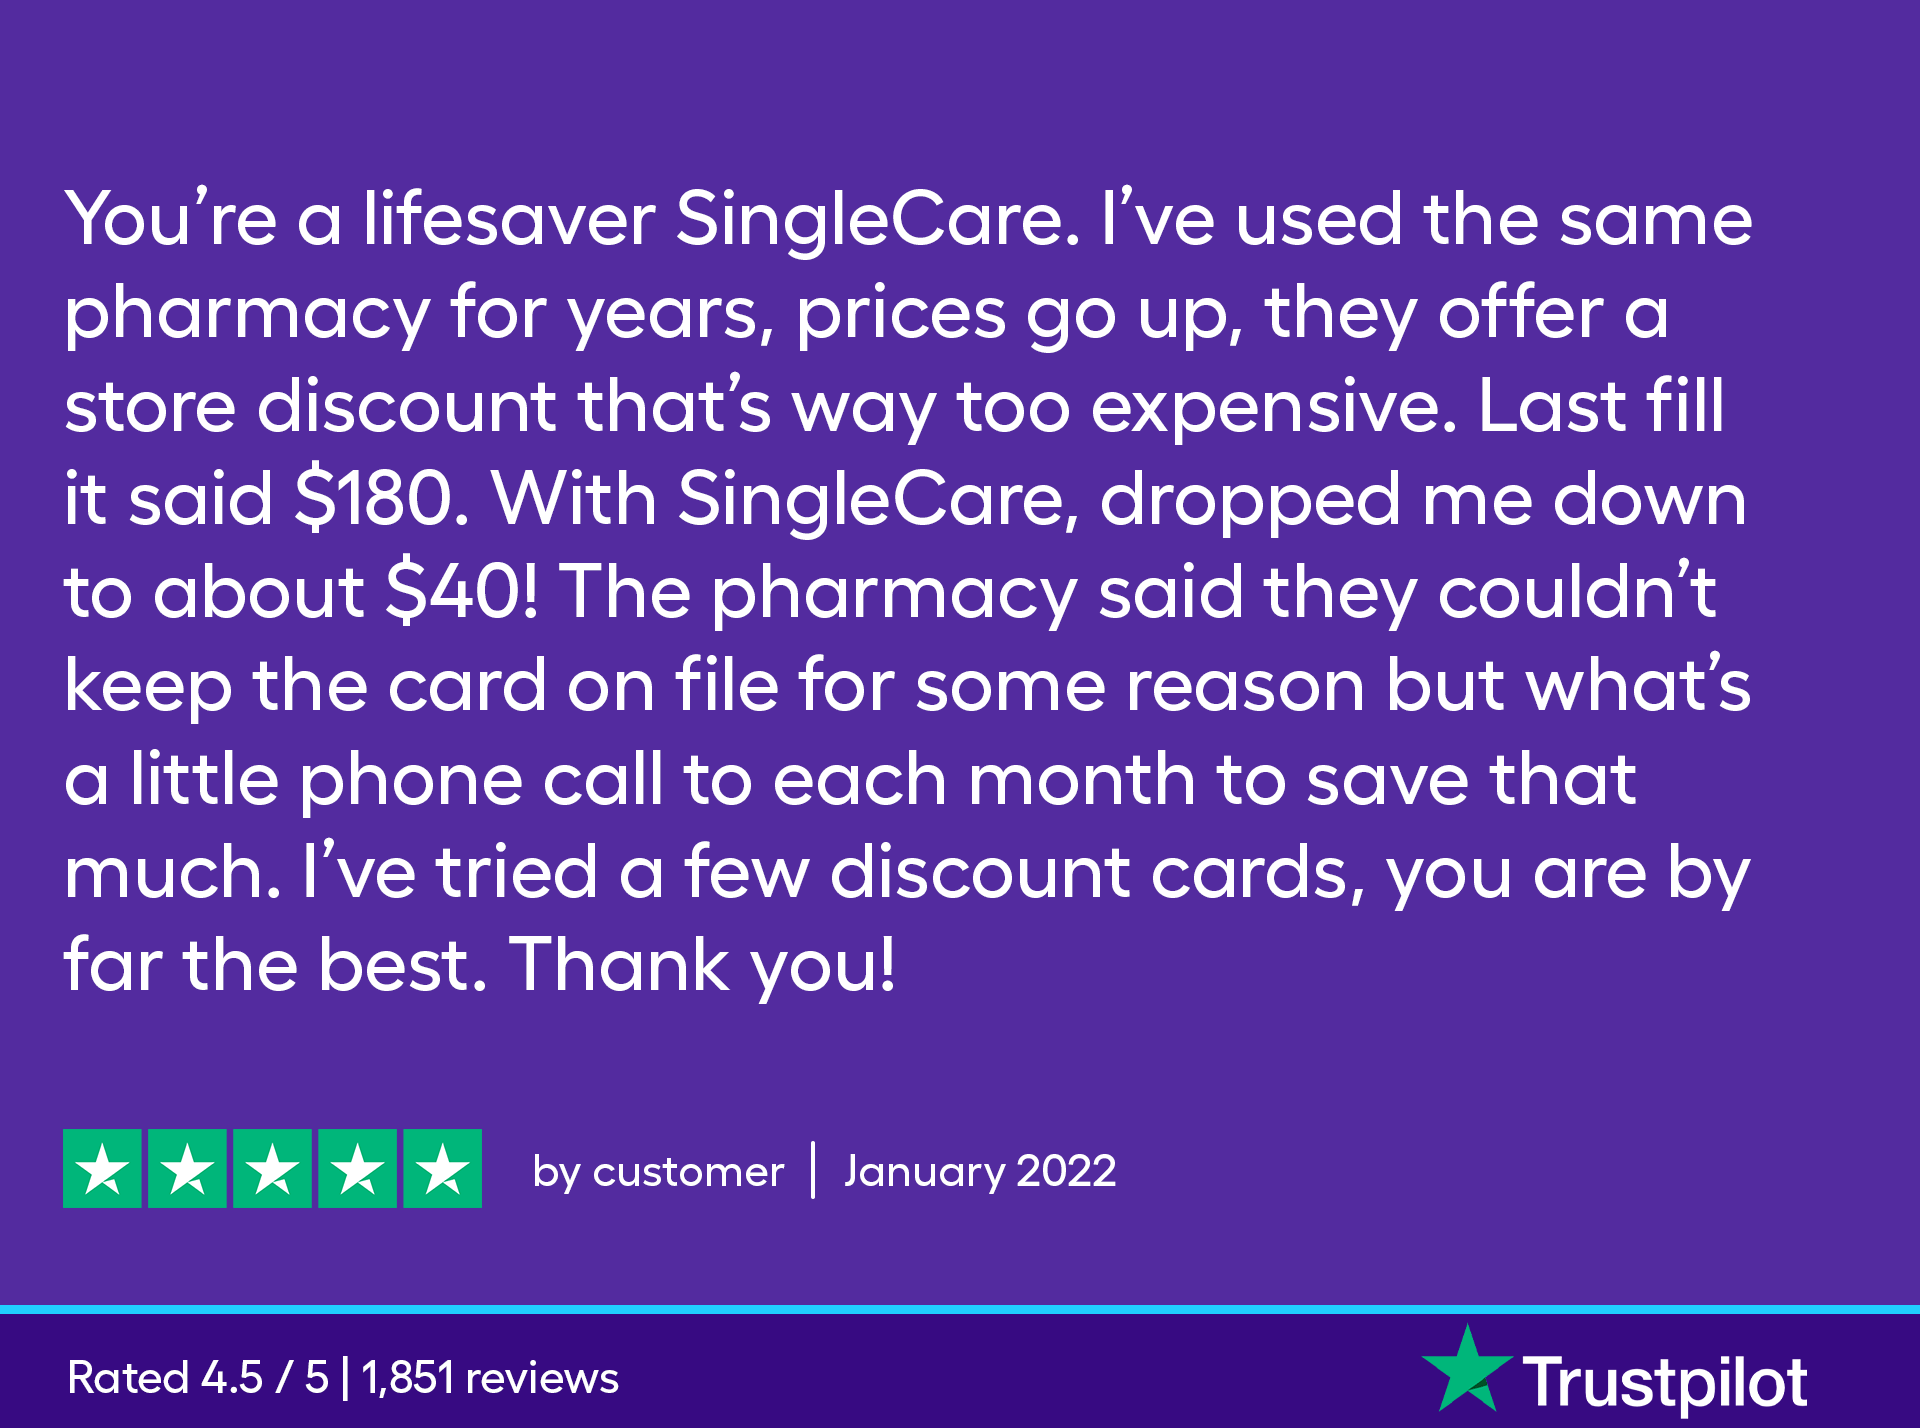 You’re a lifesaver SingleCare. I’ve used the same pharmacy for years, prices go up, they offer a store discount that’s way too expensive. Last fill it said $180. With SingleCare, dropped me down to about $40! The pharmacy said they couldn’t keep the card on file for some reason but what’s a little phone call each month to save that much. I’ve tried a few discount cards, you are by far the best. Thank you! 